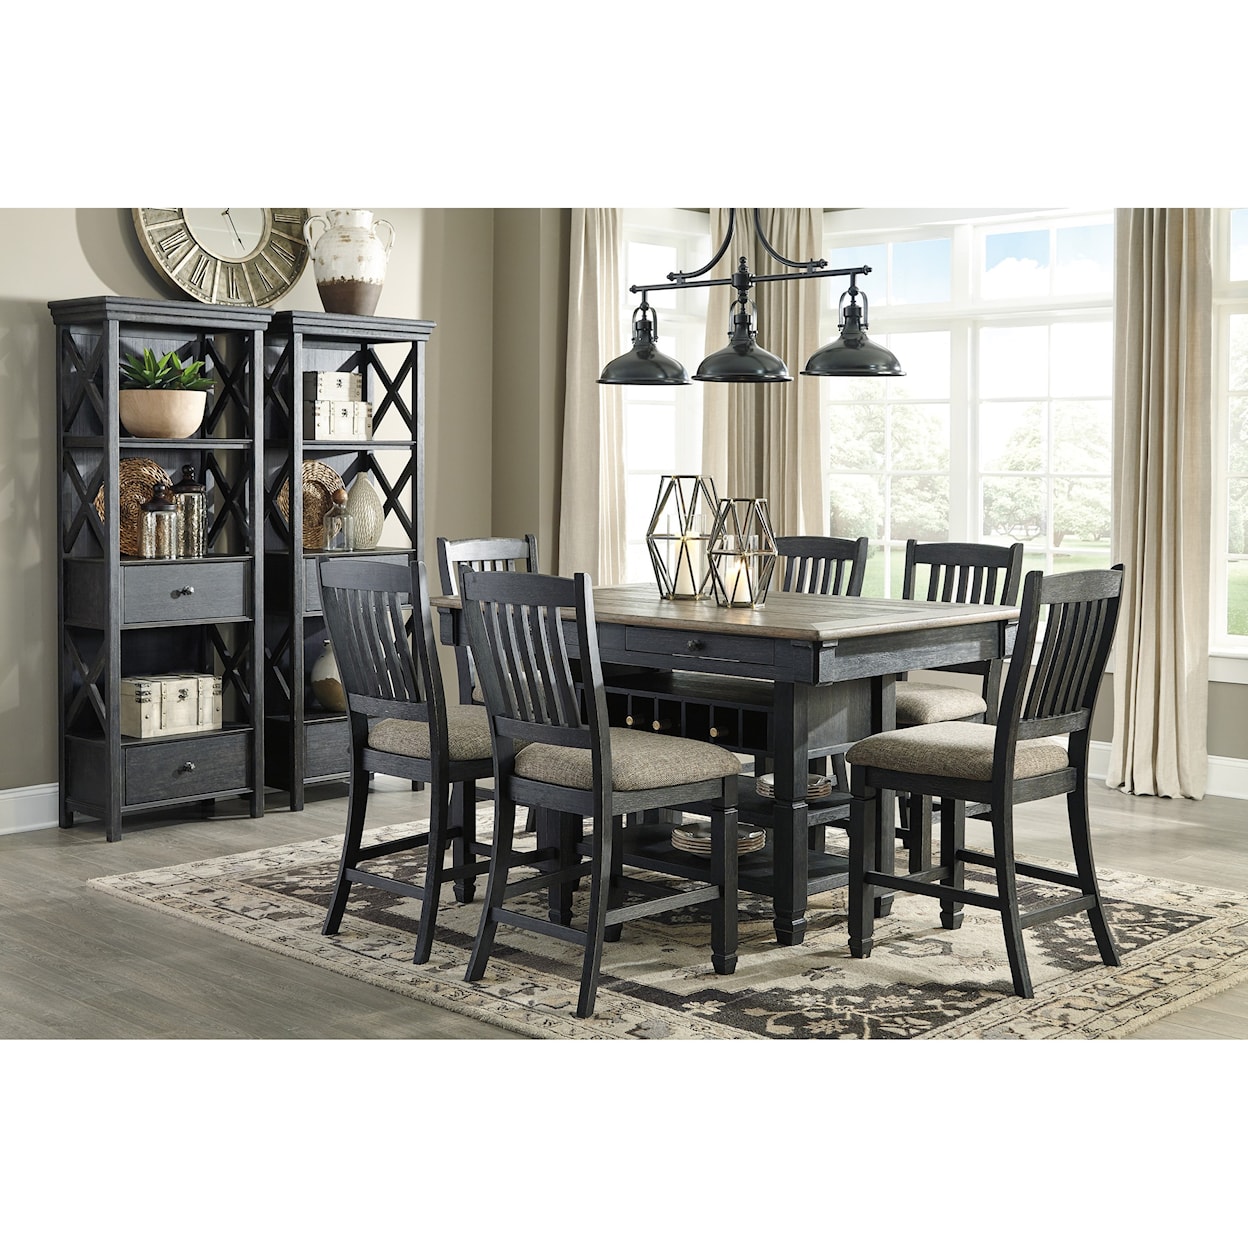 Signature Design by Ashley Furniture Tyler Creek Rectangular Dining Room Counter Table